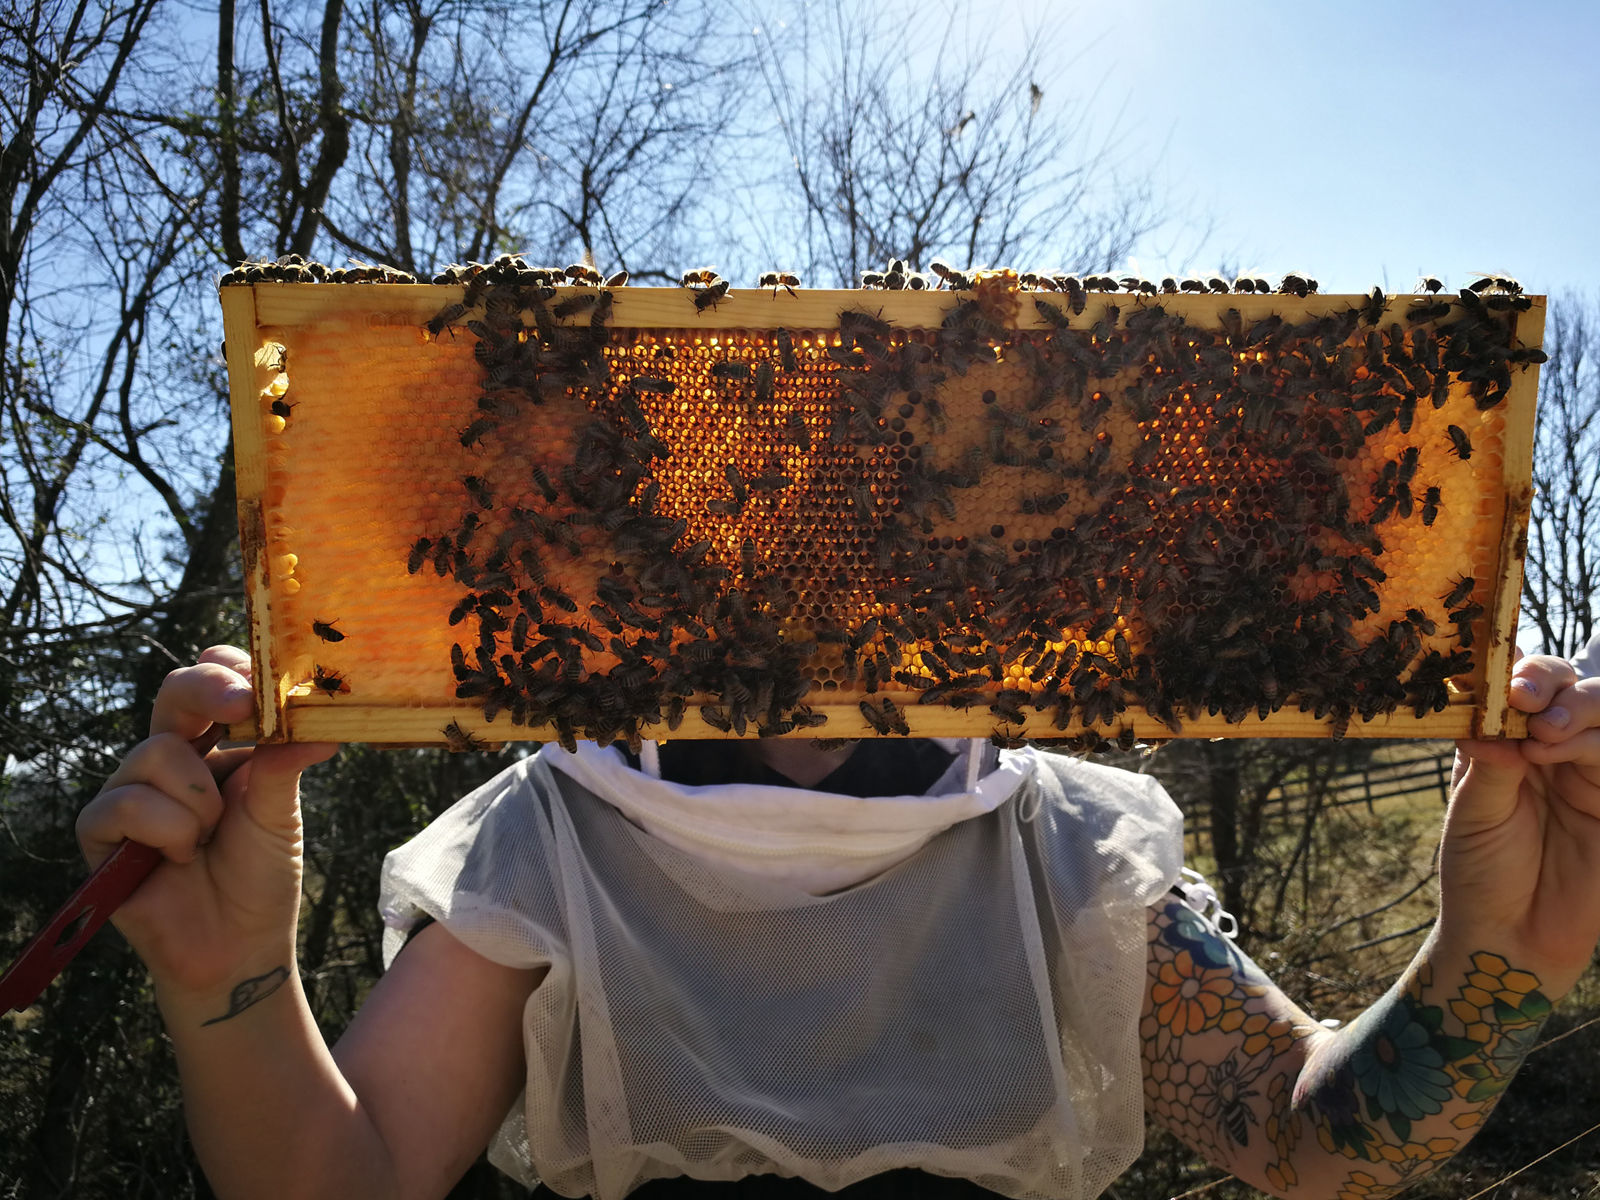 "Pollinators are being wiped out by the toxic pesticides applied to farms and lawns everywhere," said MOM's founder Scott Nash, who happens to be a beekeeper himself. "It's important to protect our pollinators and to bring awareness about how we can make a difference." (Courtesy Richland Honey Bees)